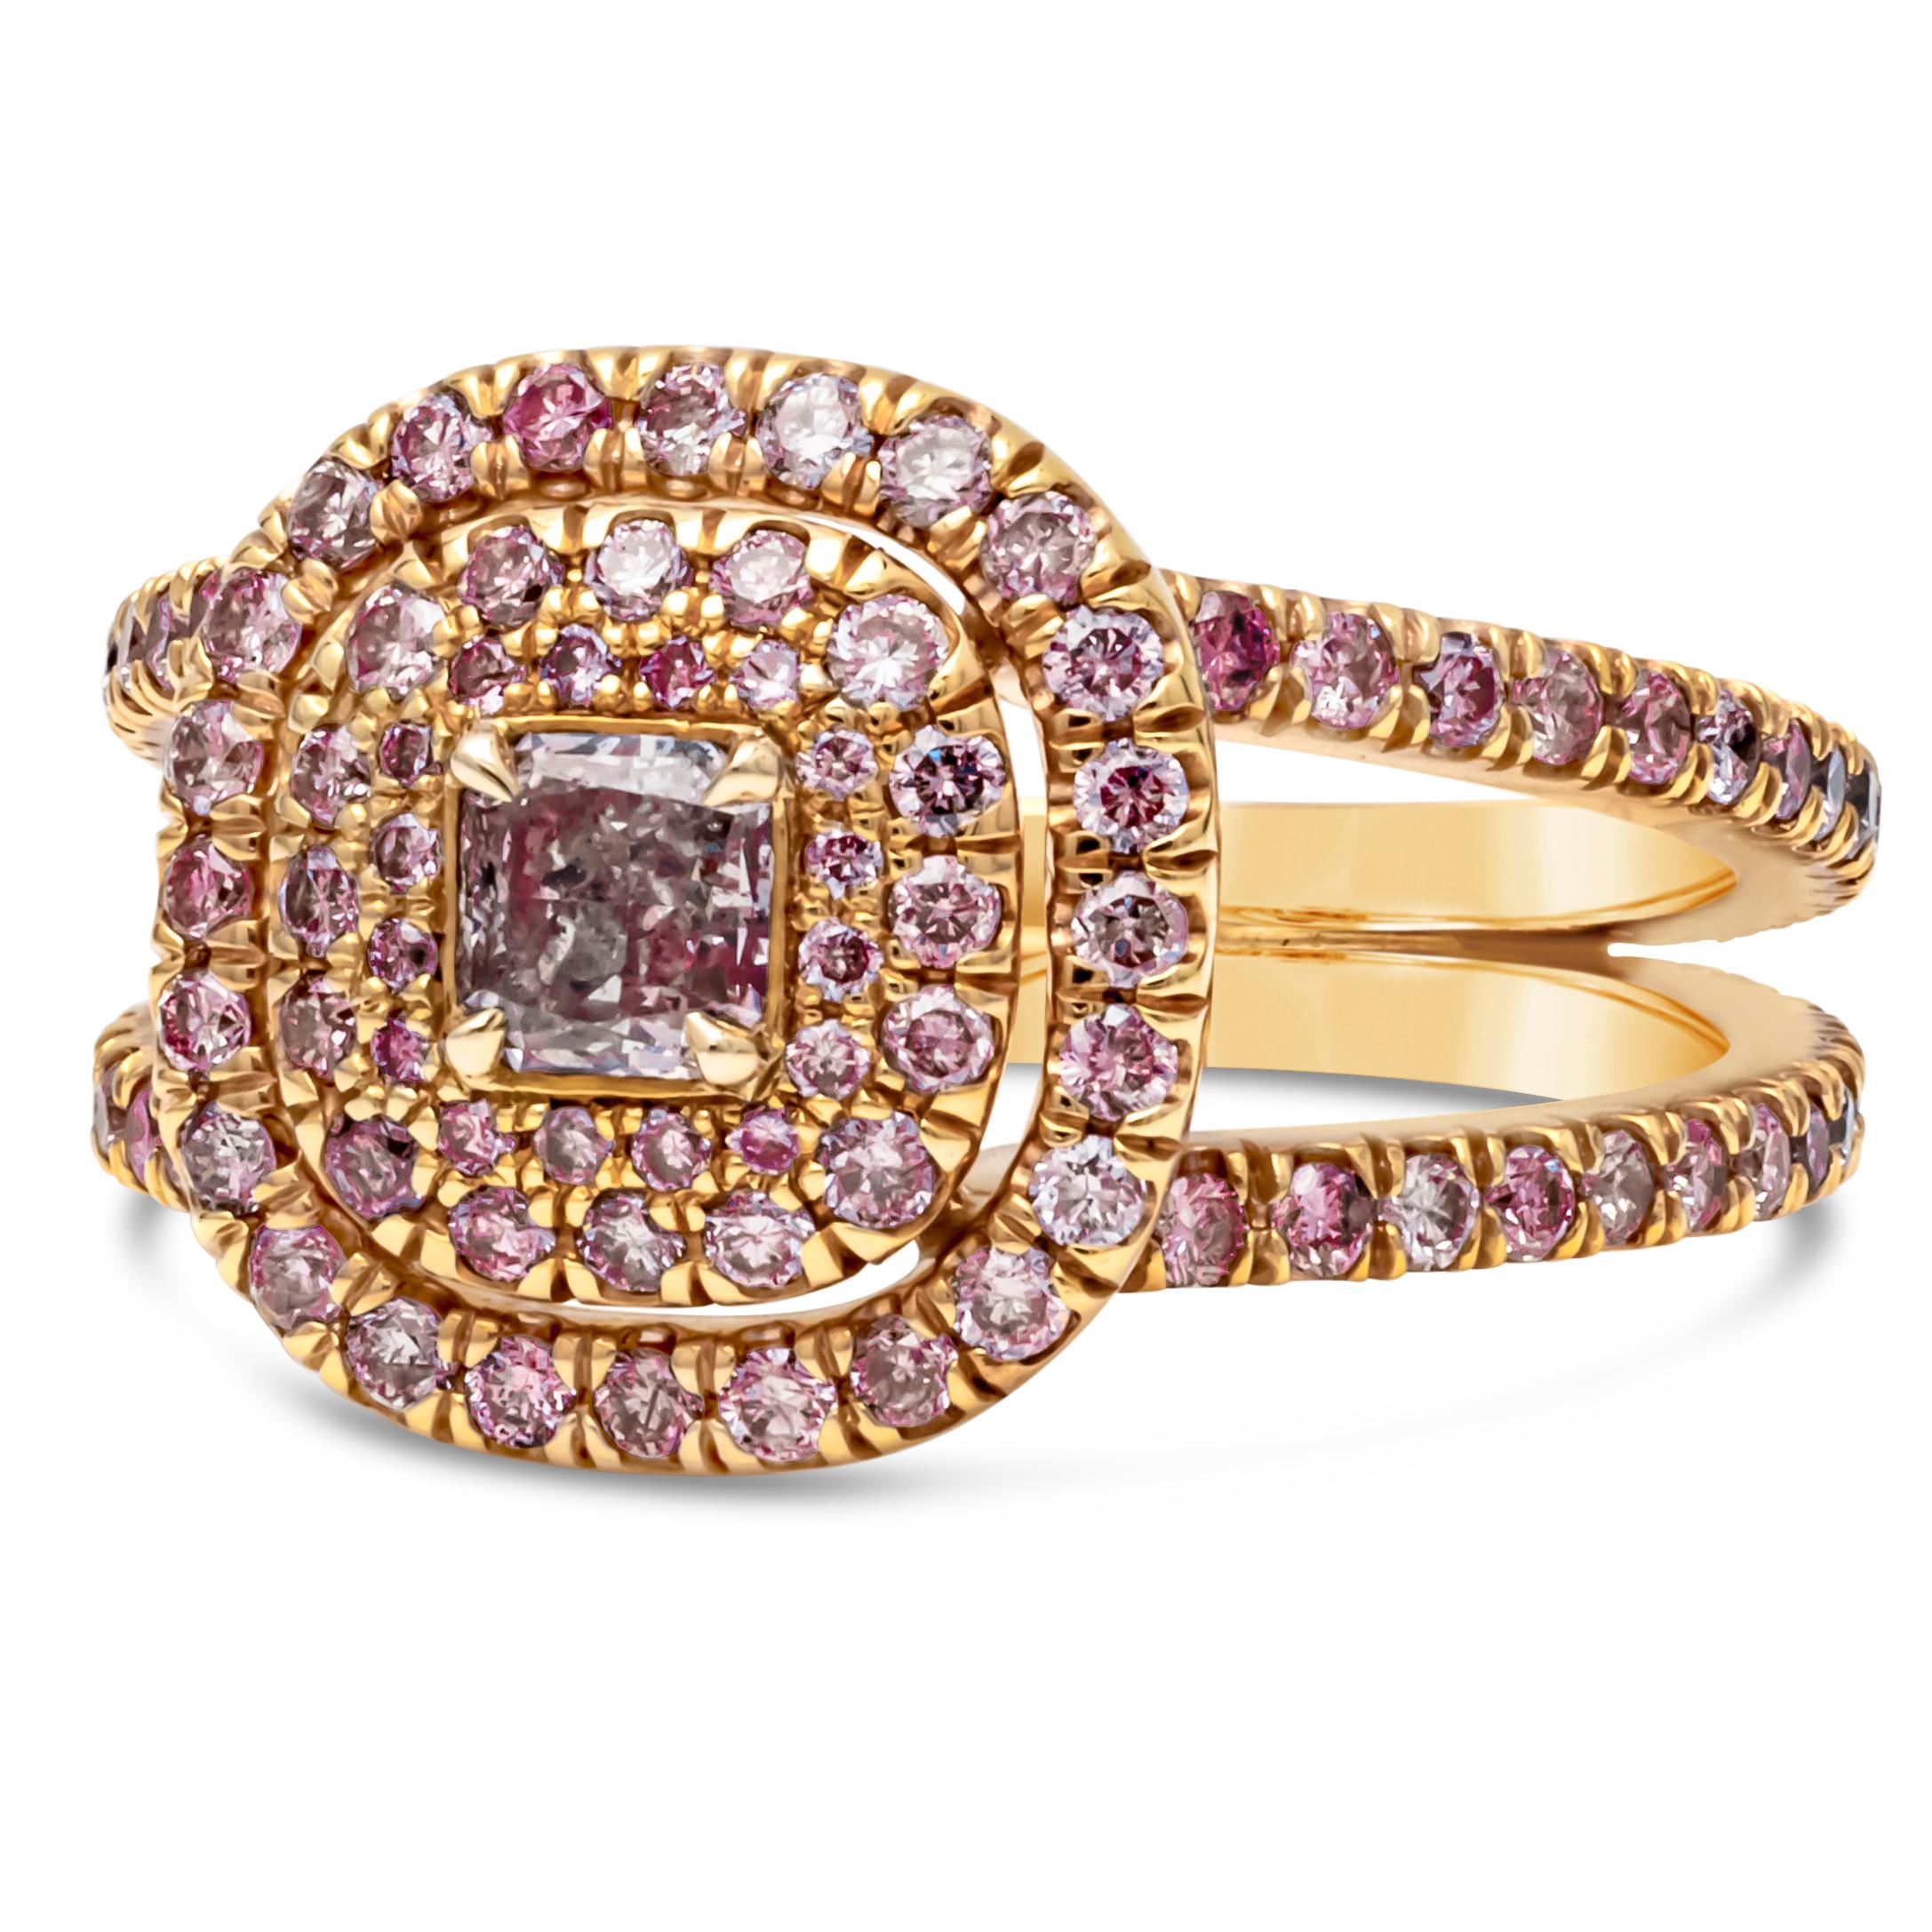 A unique engagement ring style showcasing a 0.31 carats radiant cut diamond certified by GIA as Fancy Light Purplish Pink color. Surrounded by three-row of brilliant round pink diamonds in a triple halo design and set in a diamond encrusted